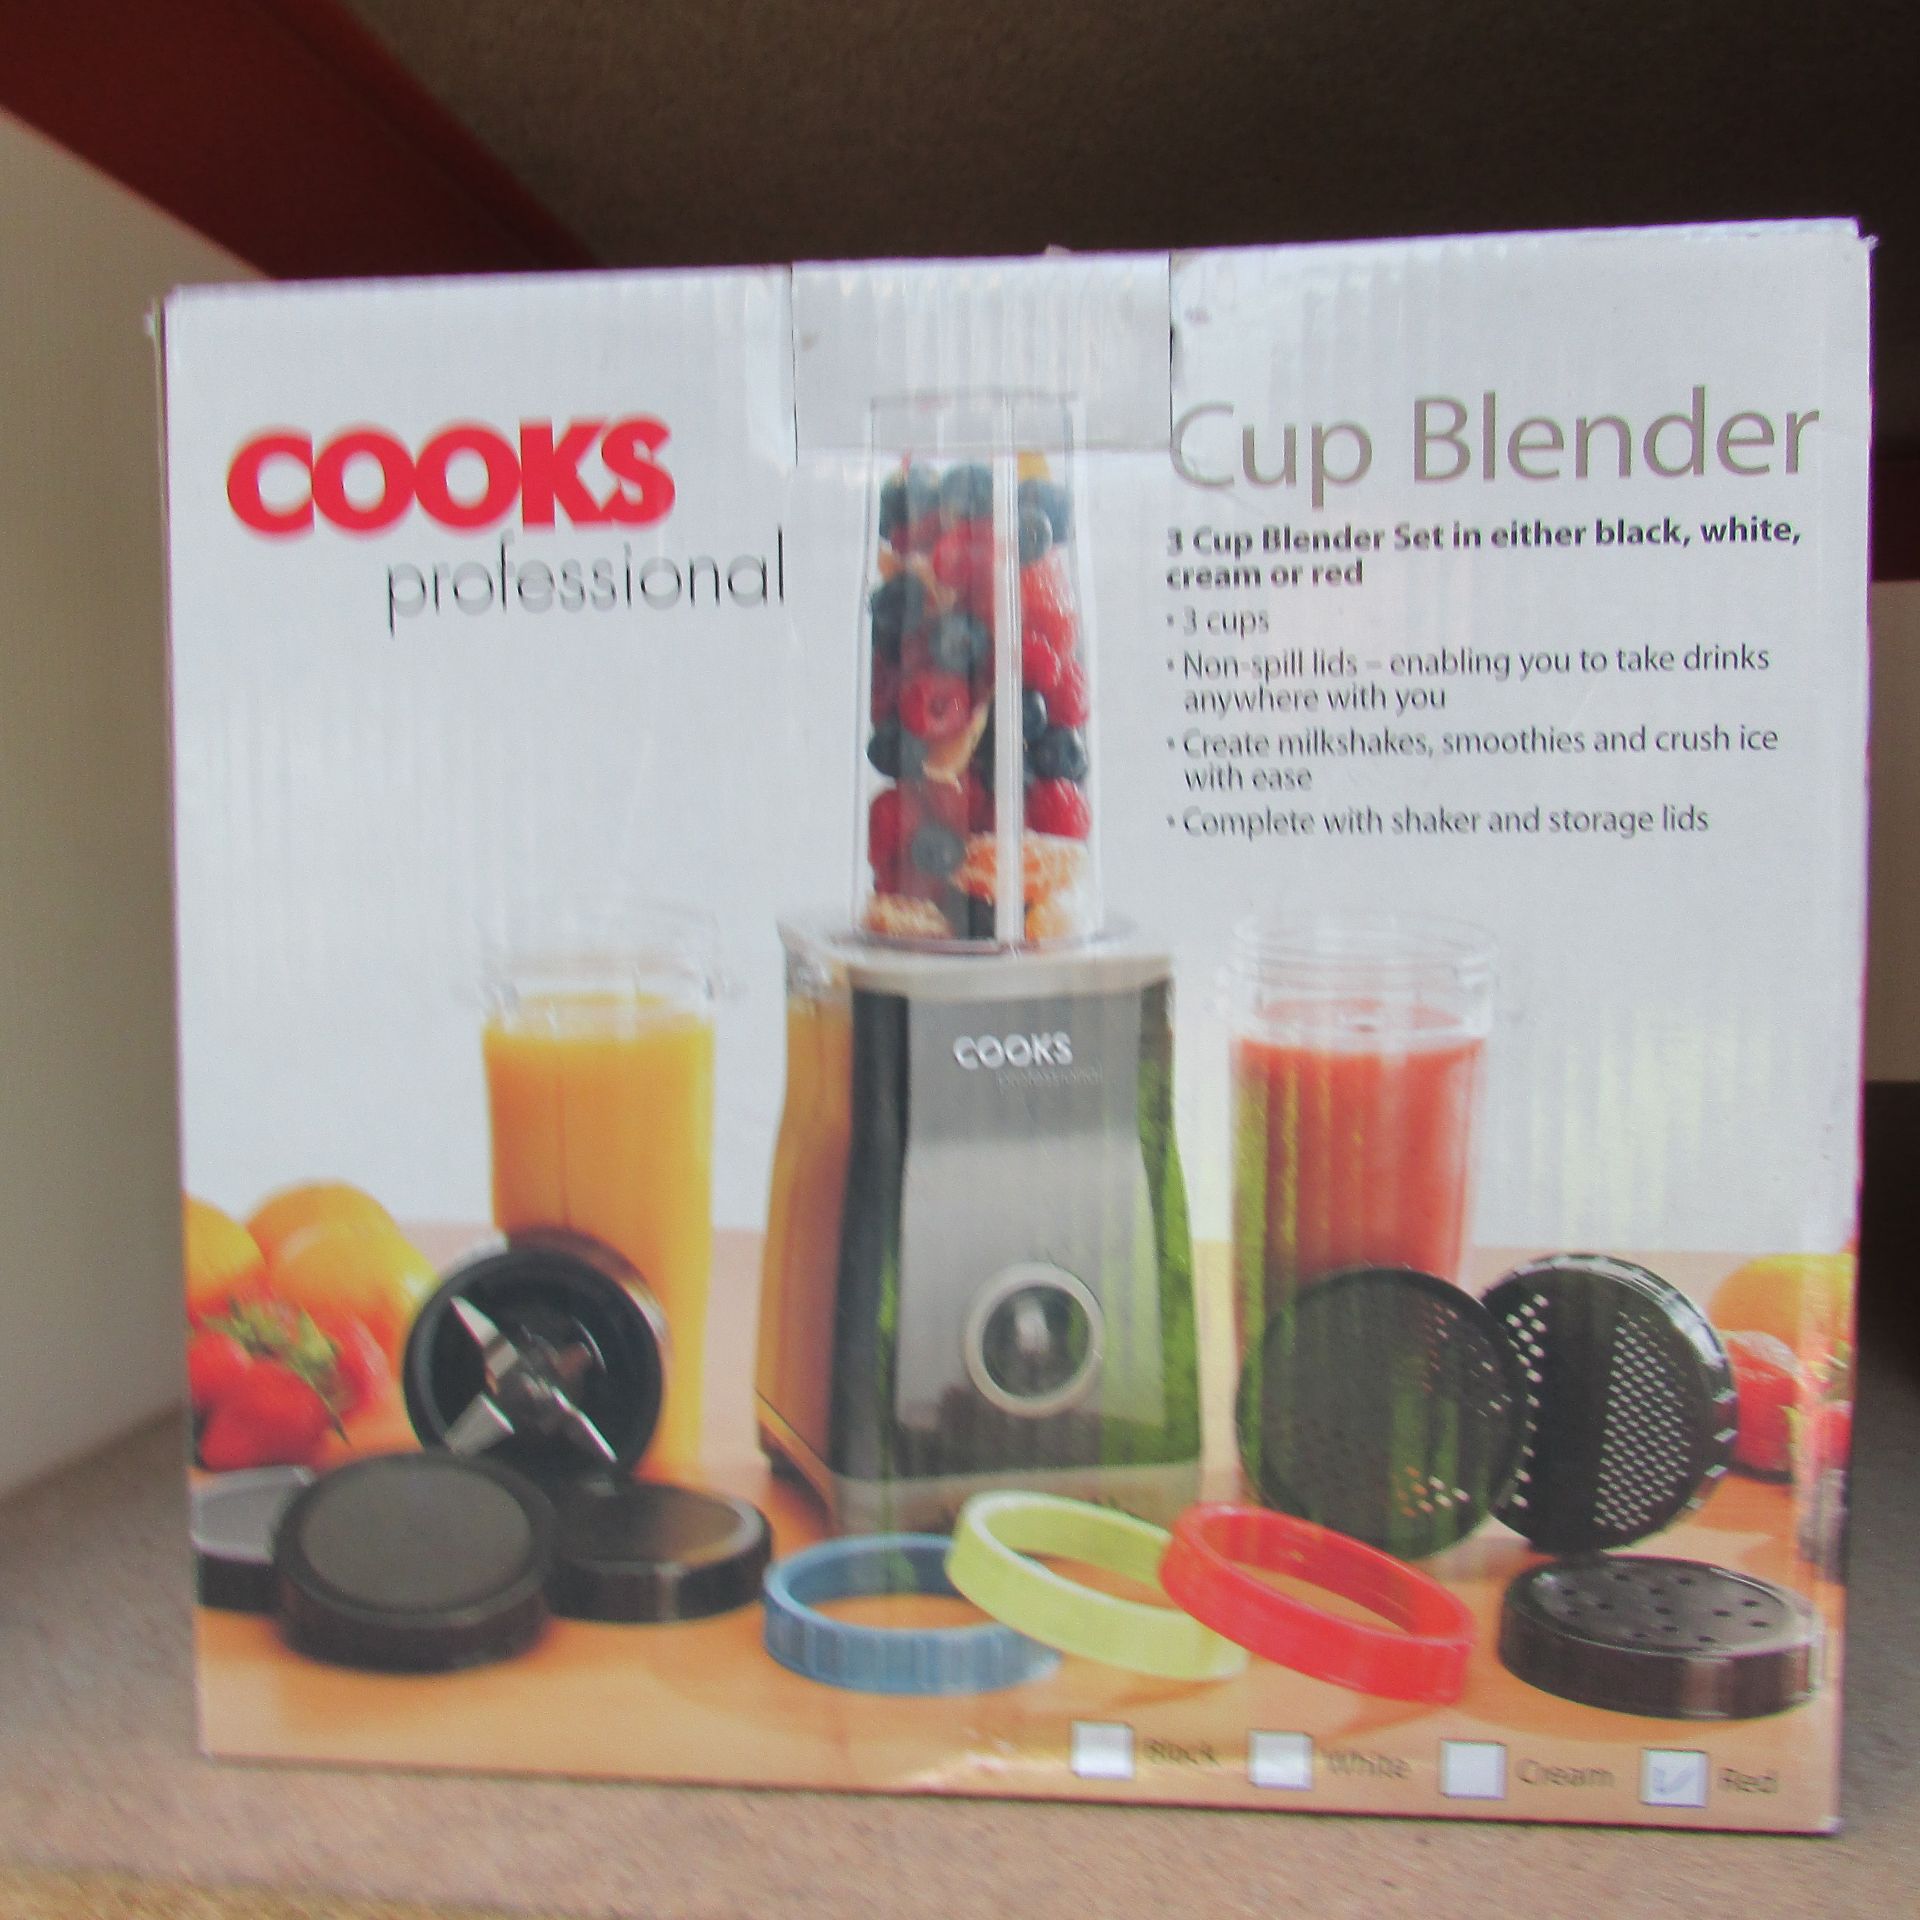 COOKS PROFESSIONAL 3 PIECE CUP BLENDER